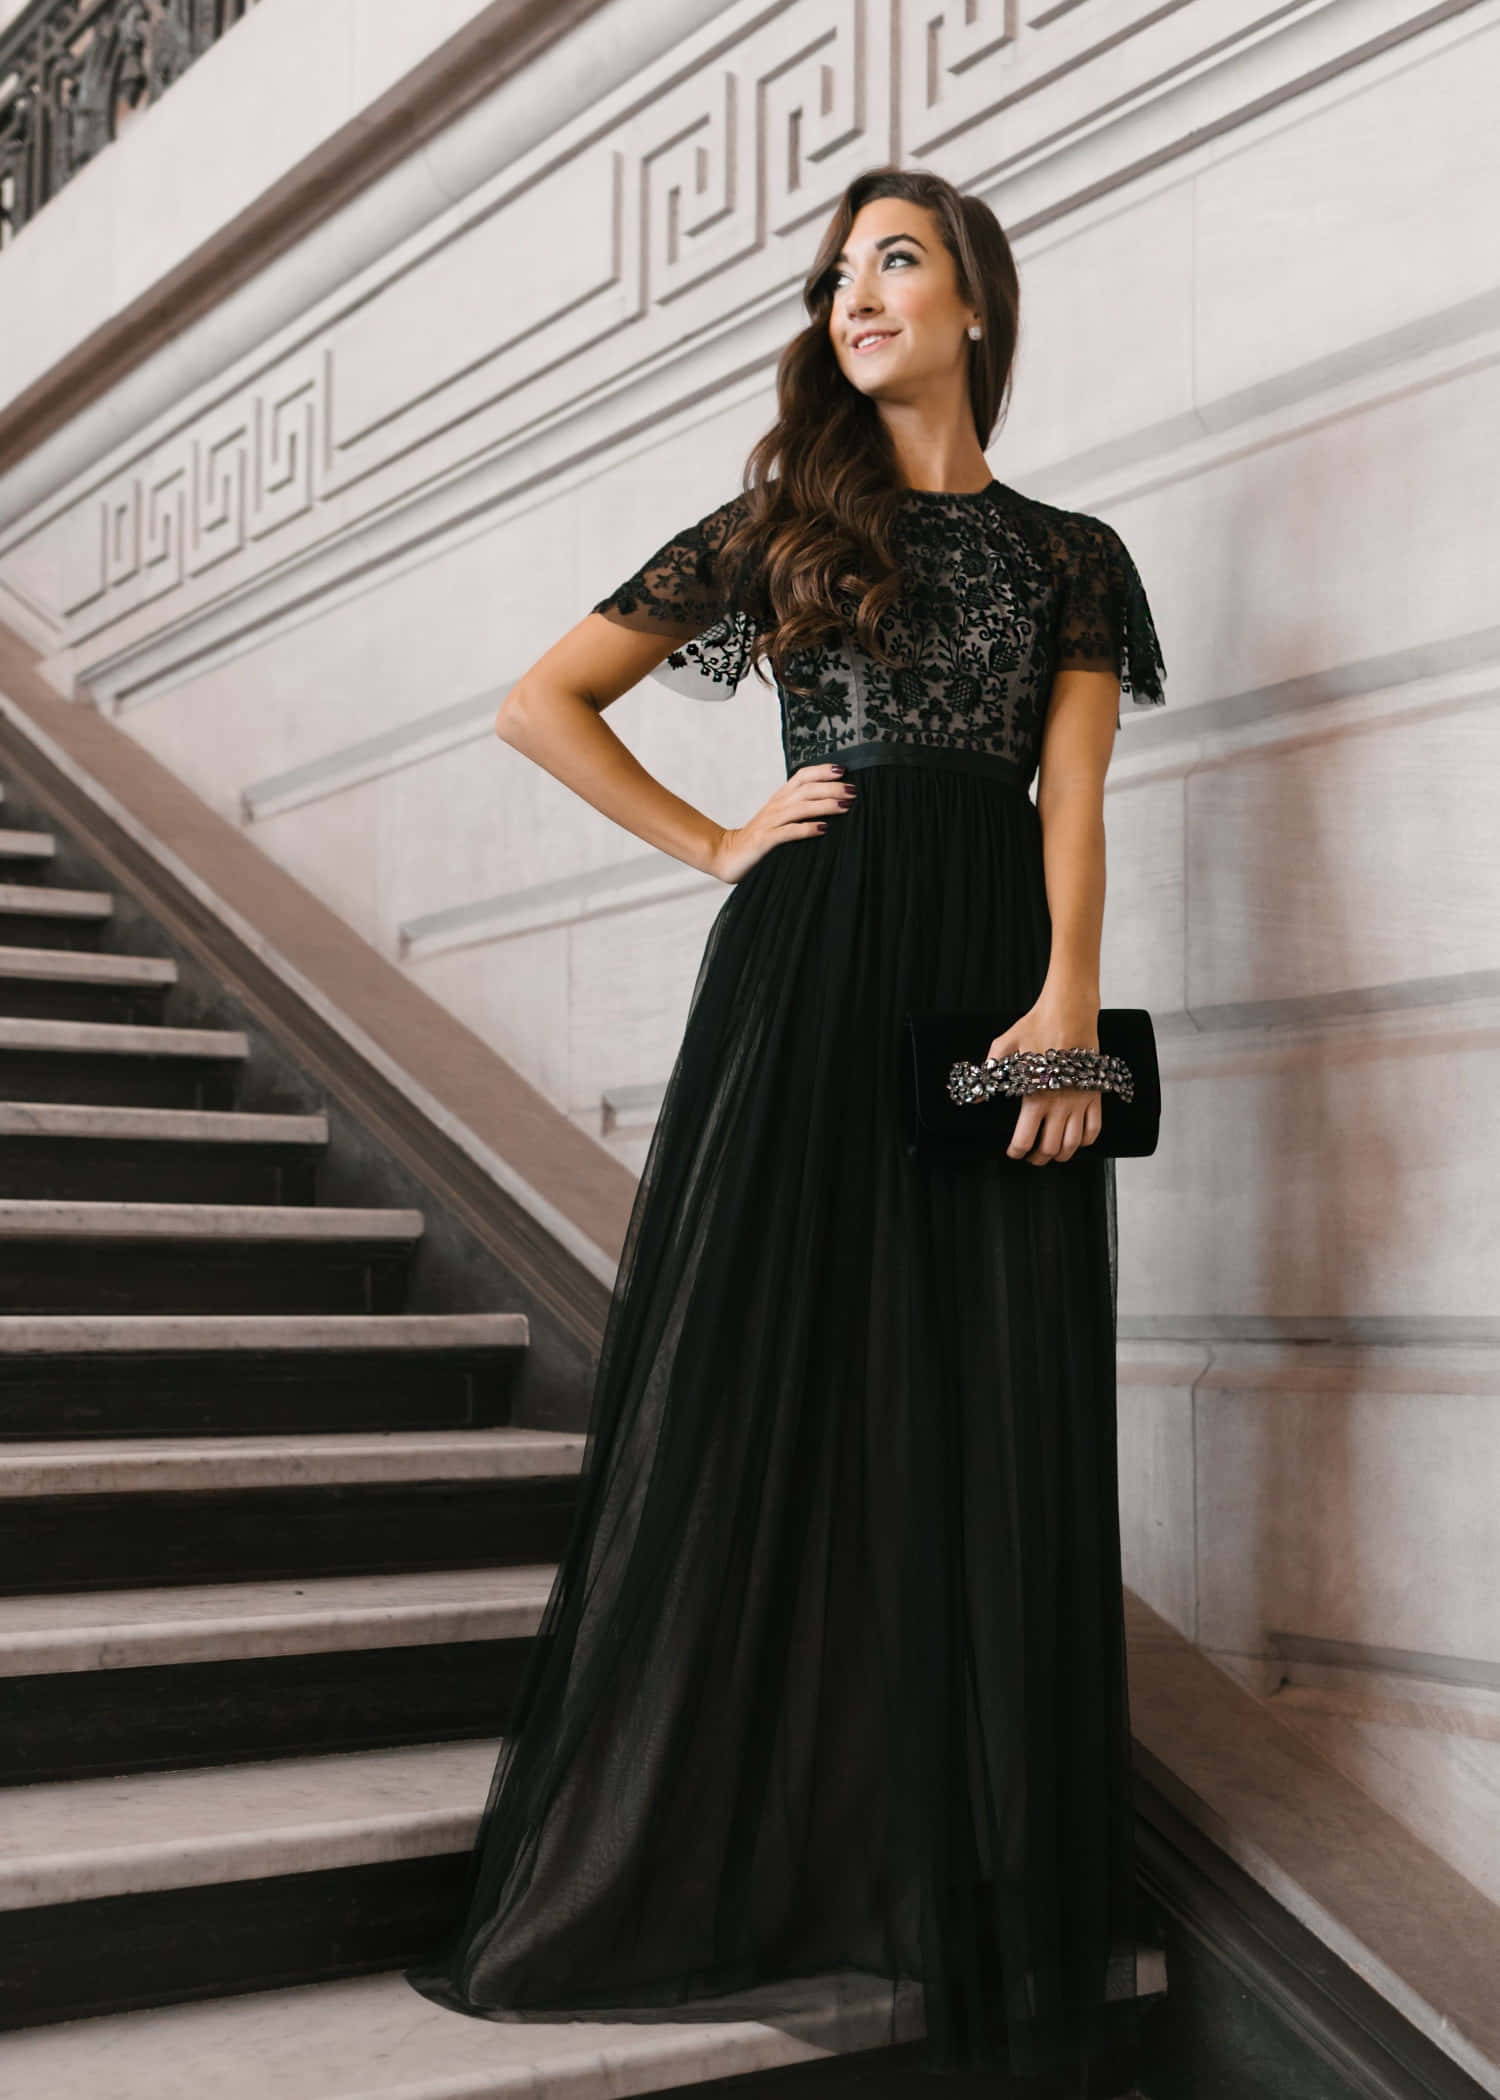 Feel exquisite in a black tie dress at your next special occasion Wallpaper